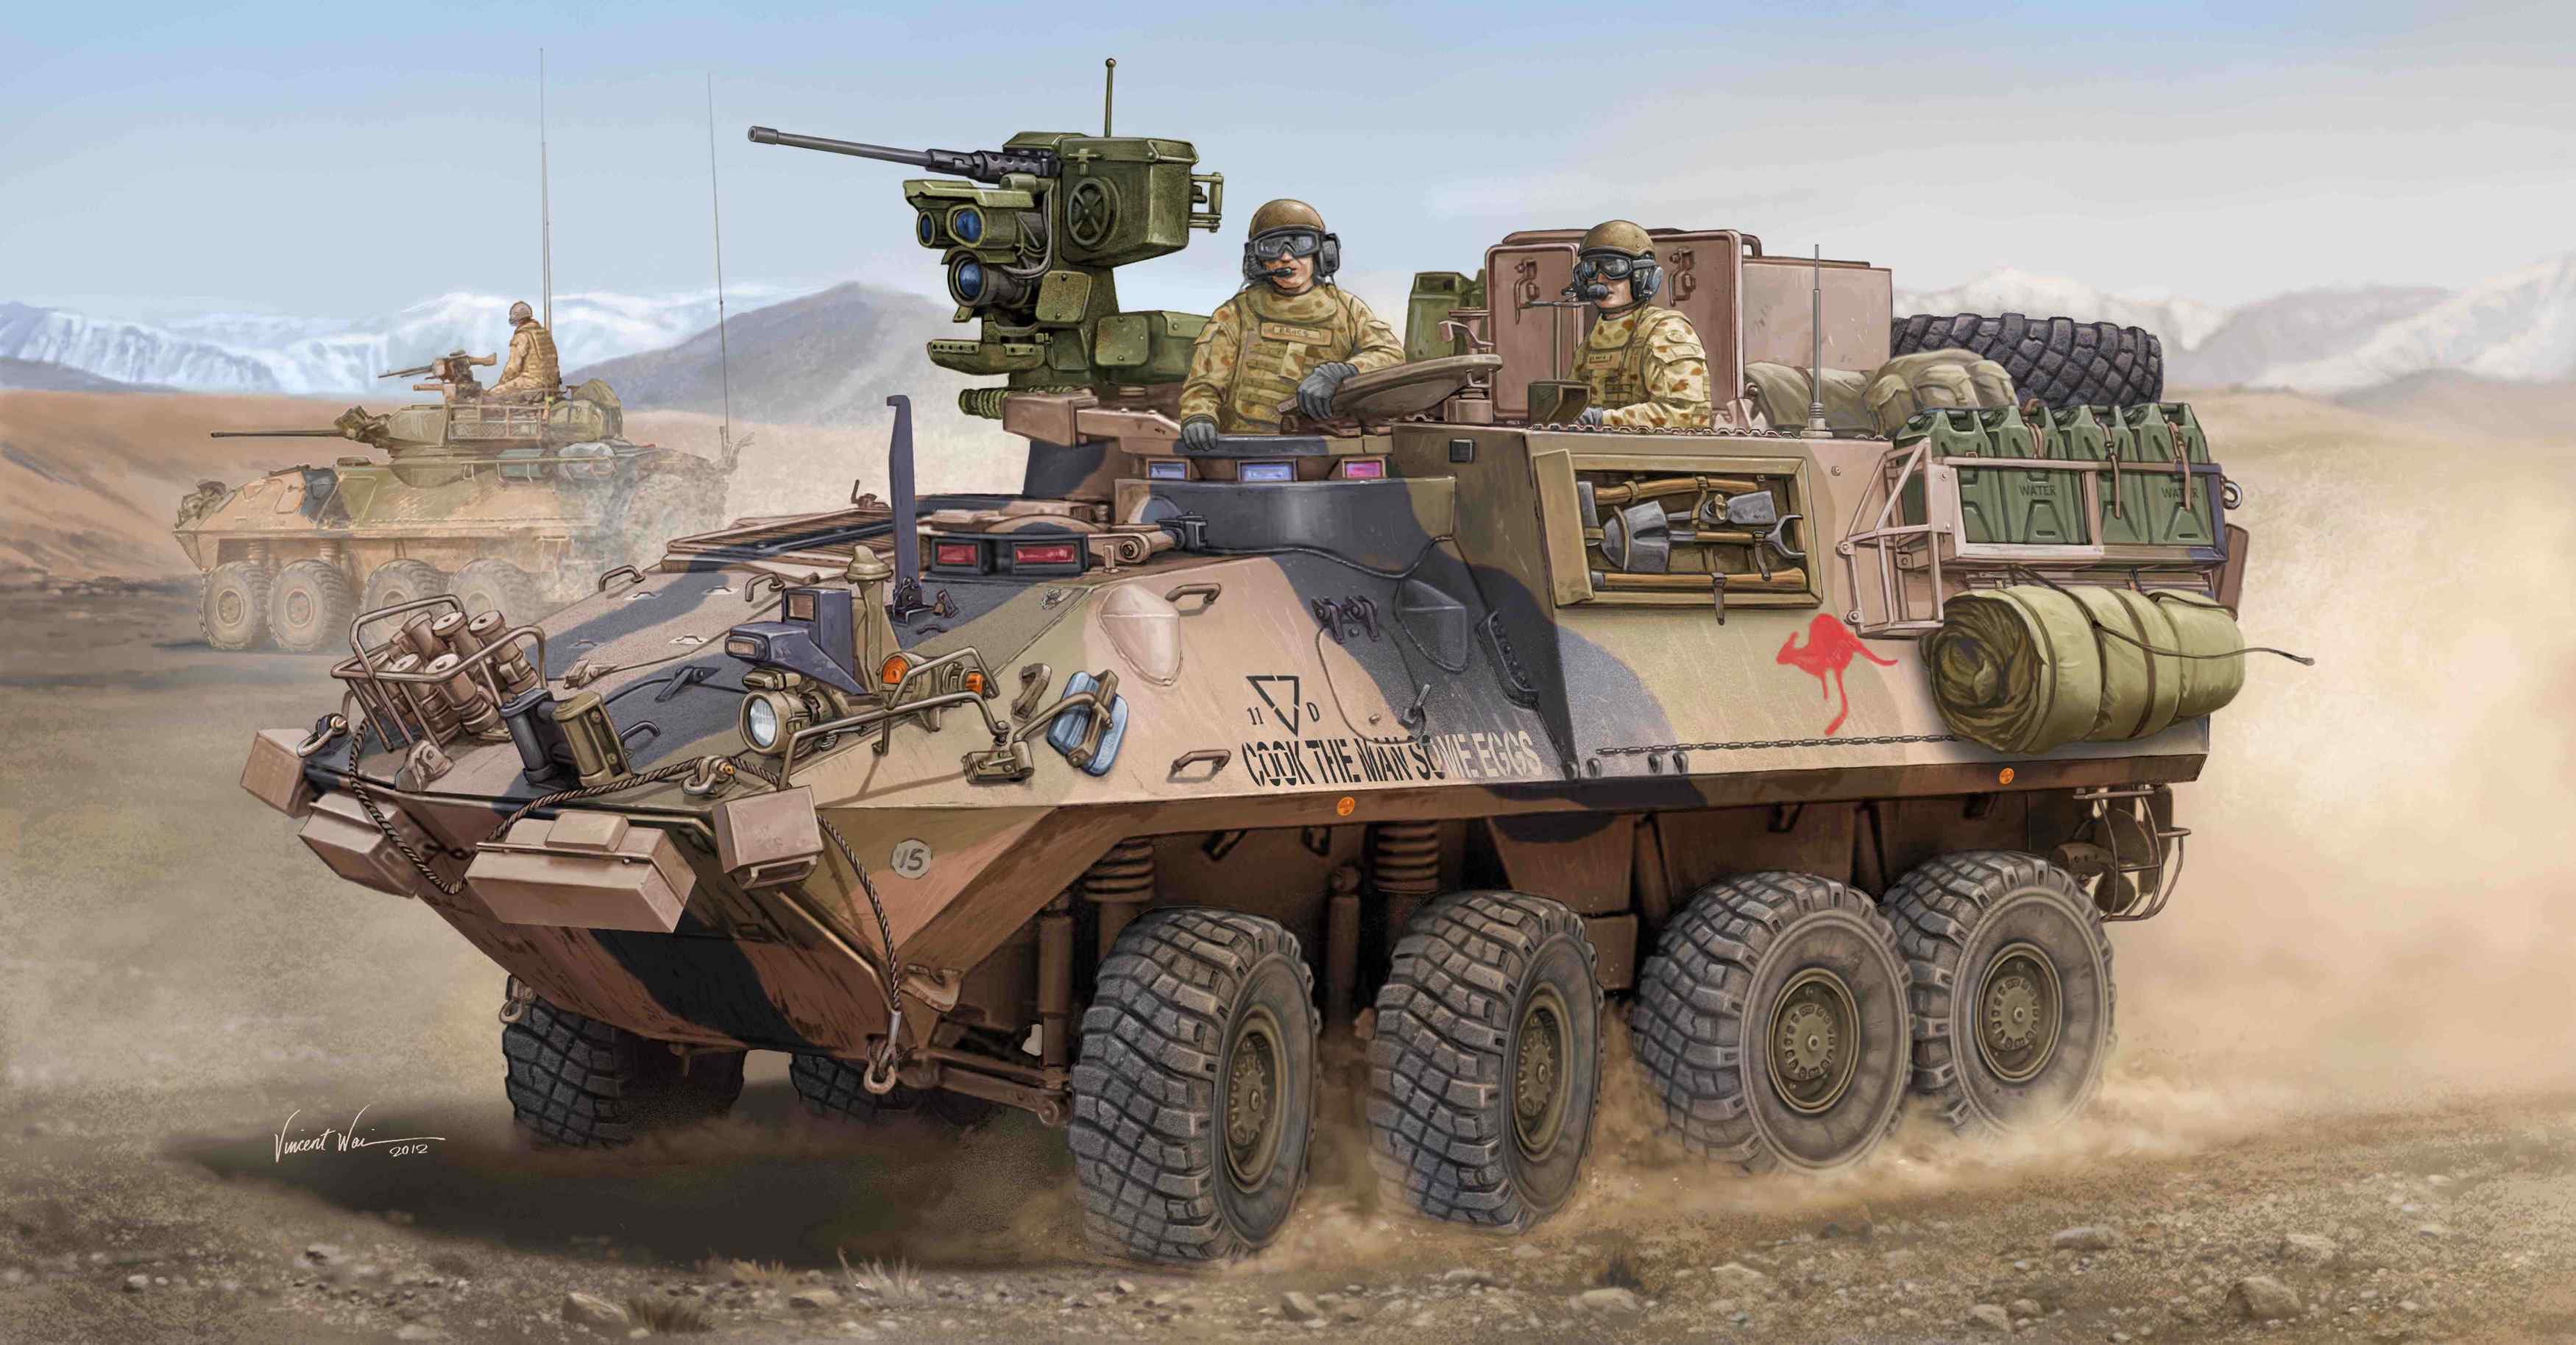 General 3500x1827 tank army military military vehicle artwork mountains soldier helmet uniform gloves infantry fighting vehicle